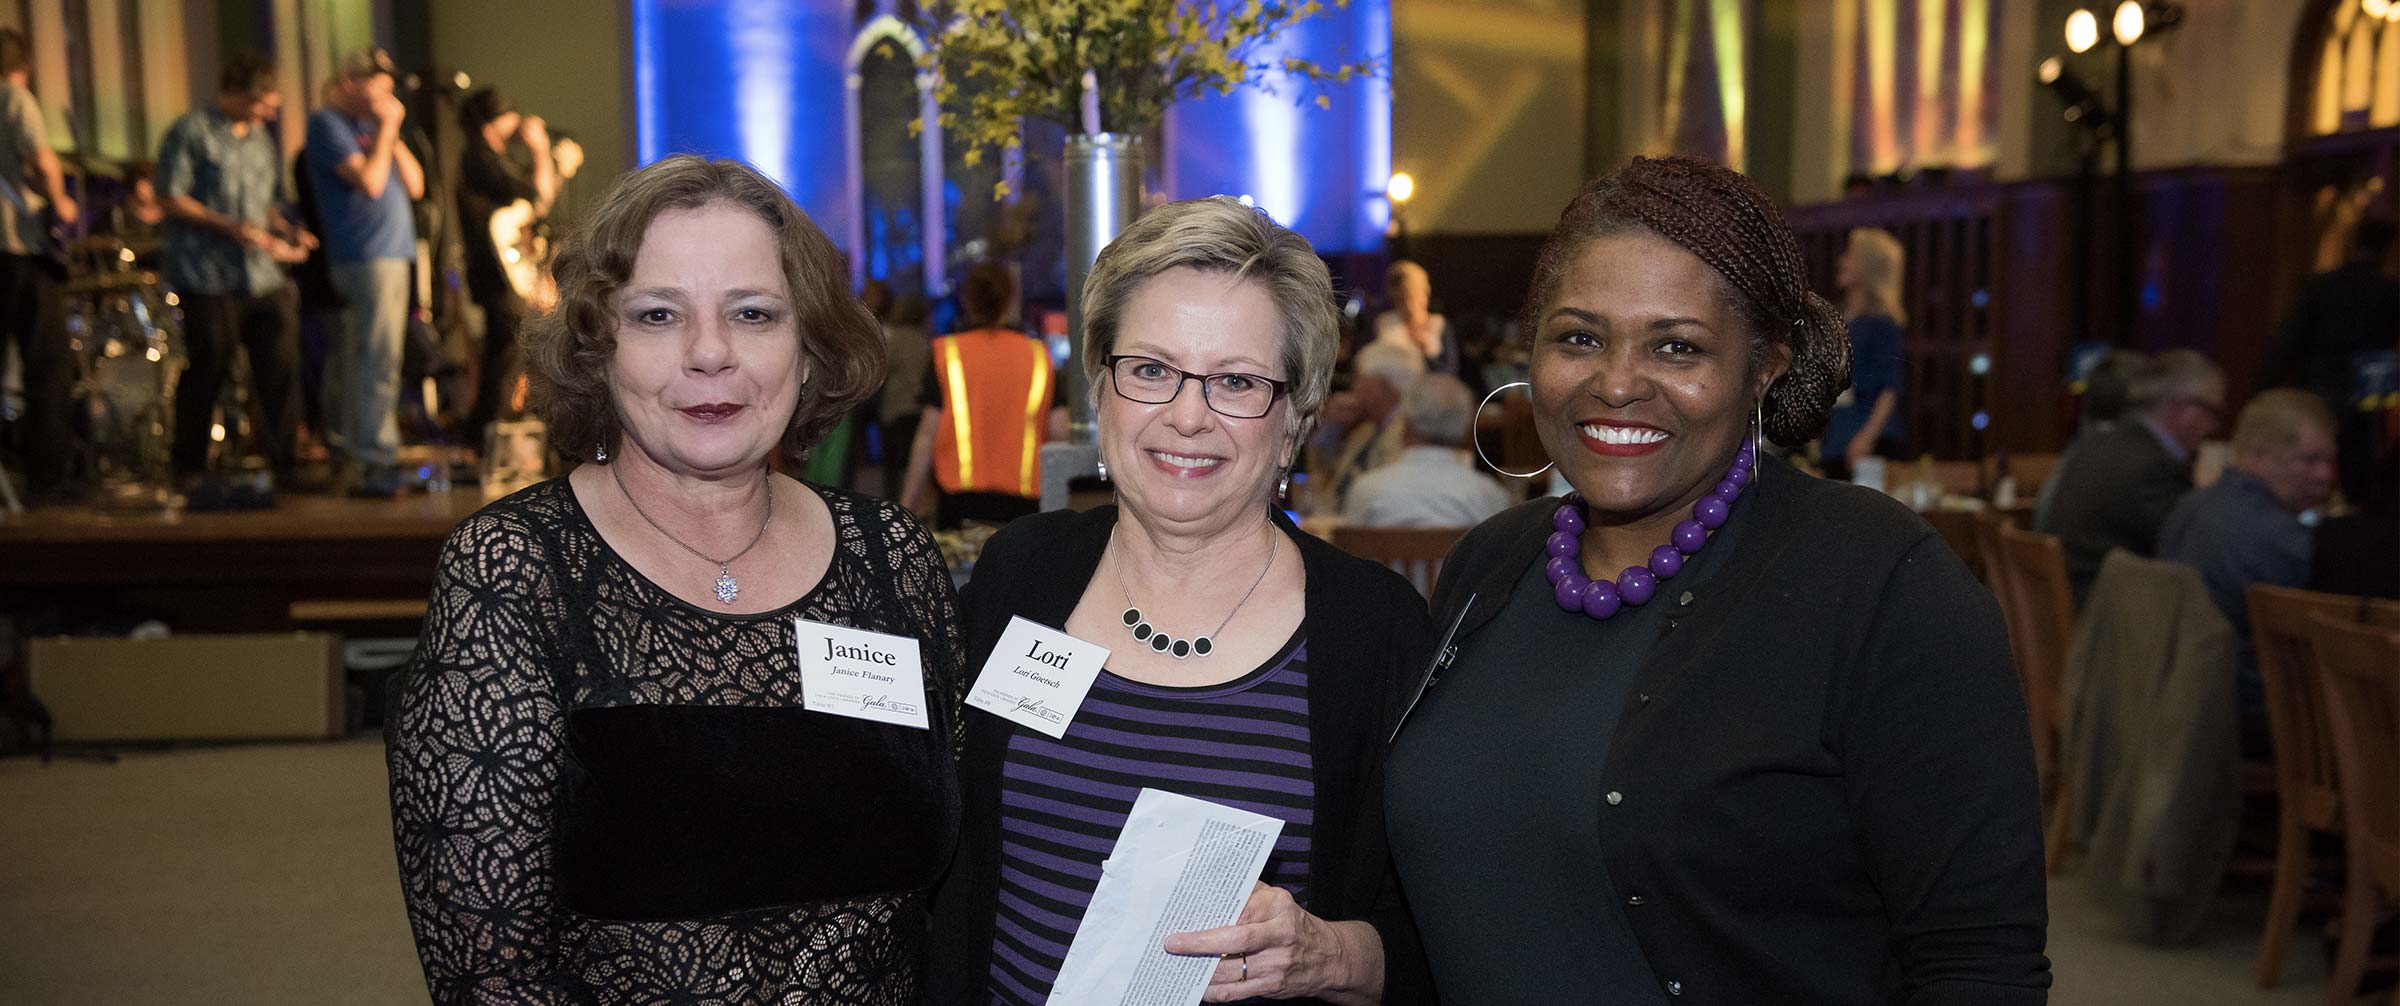 Friends of the Libraries and Dean Lori Goetsch at the 2016 gala in the Great Room.